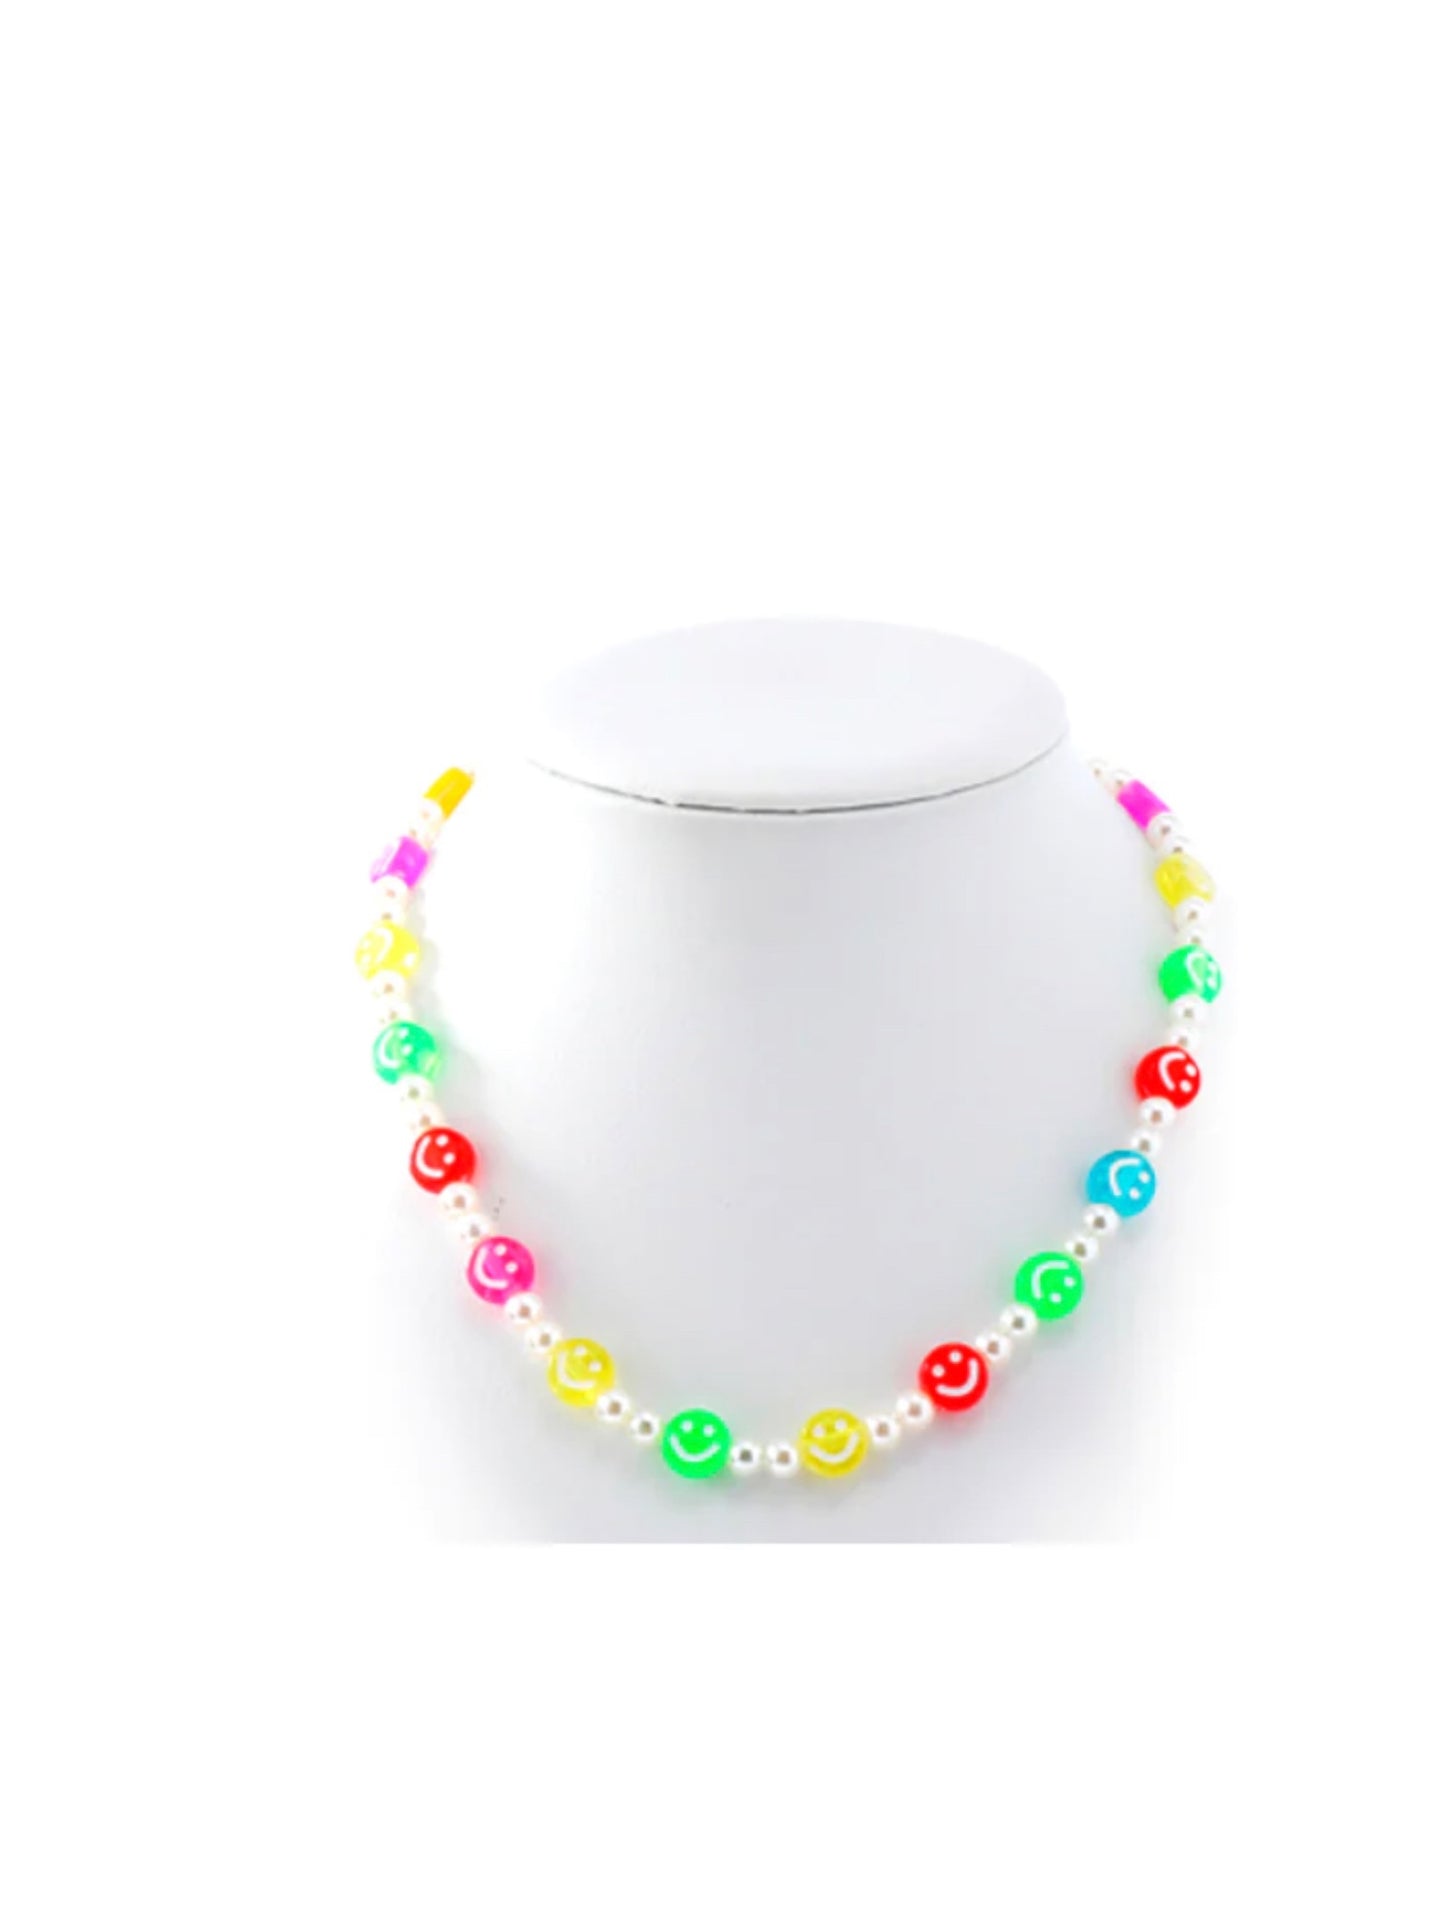 KIds Smiley Necklace